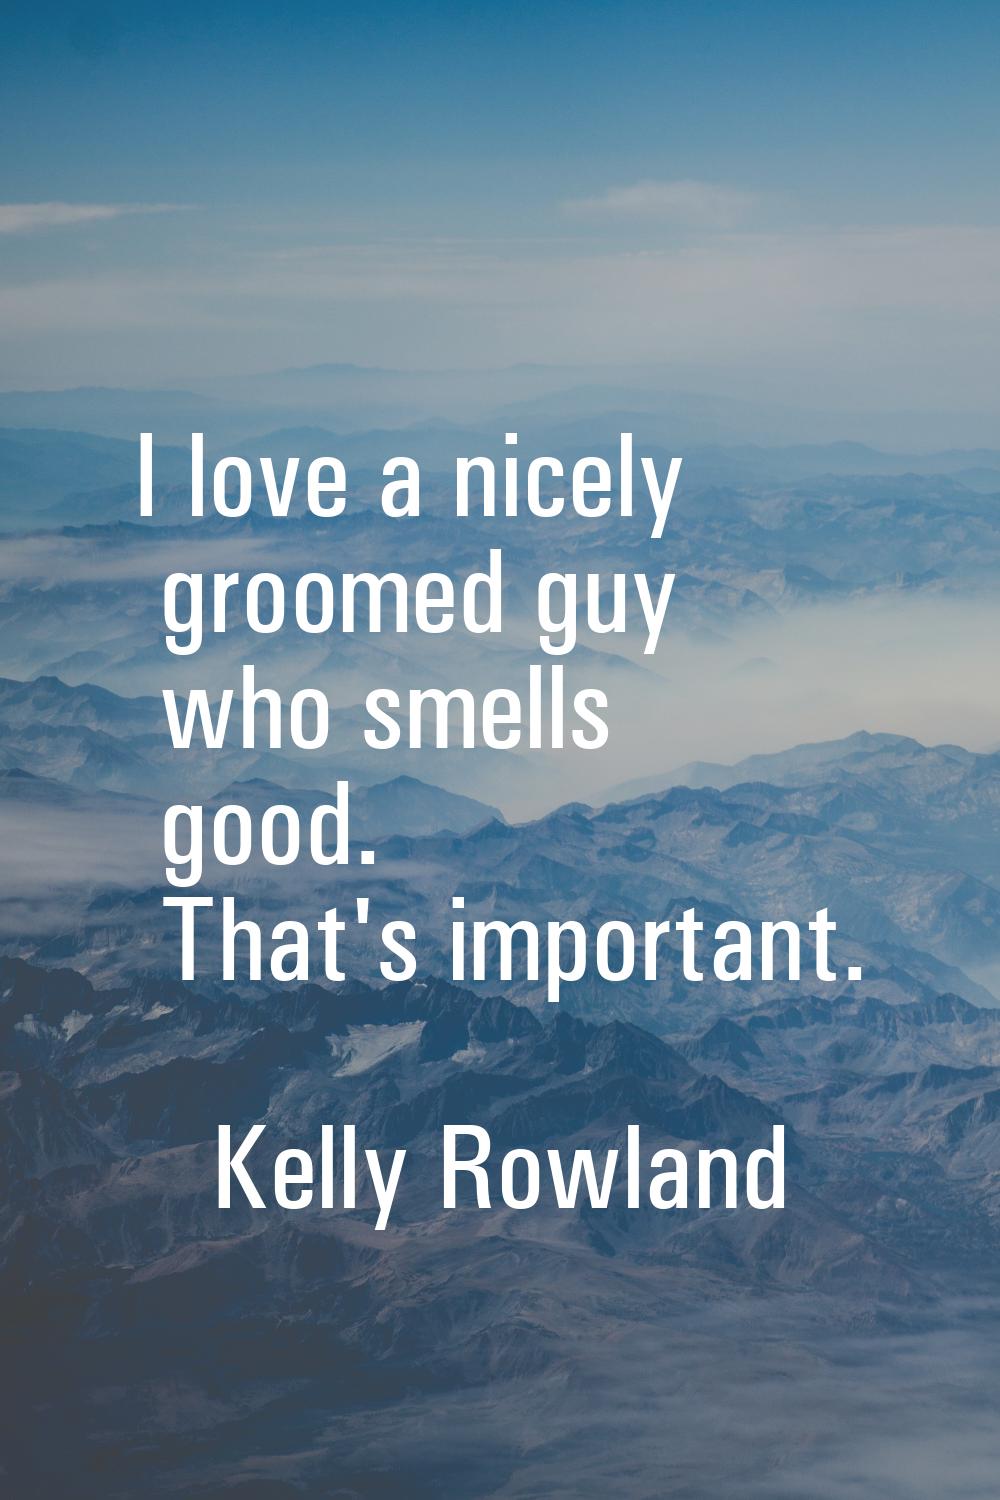 I love a nicely groomed guy who smells good. That's important.